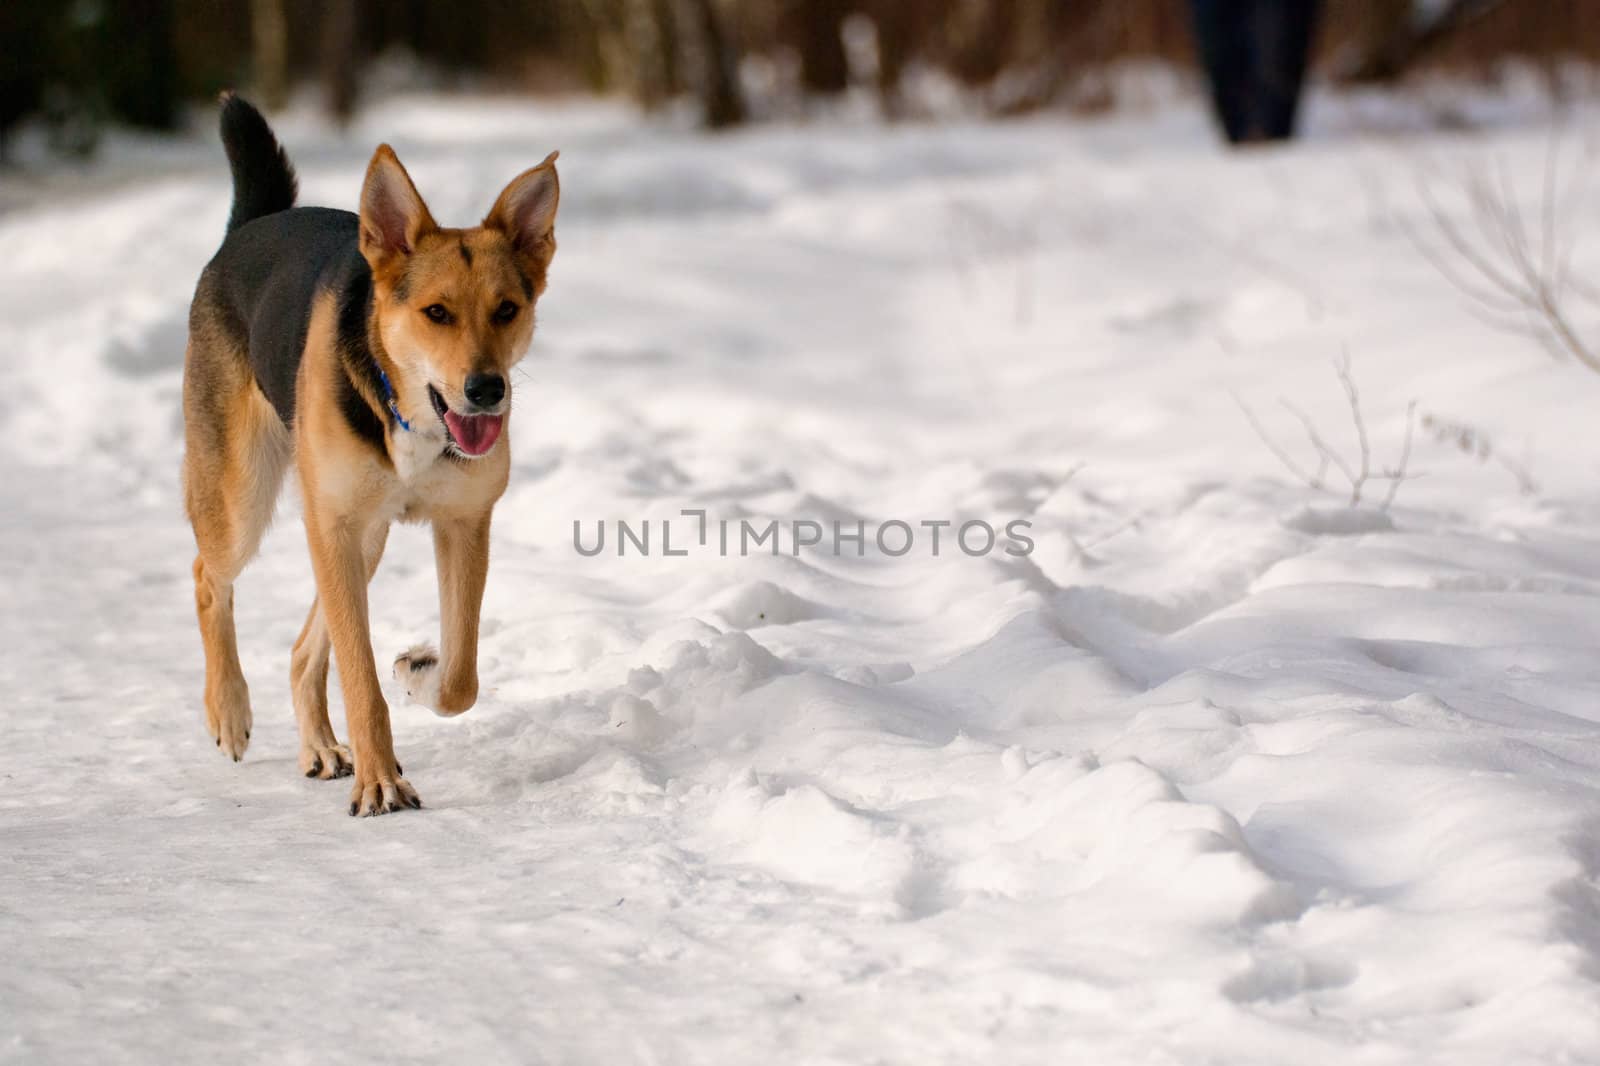 Dog running on snow in winter forest